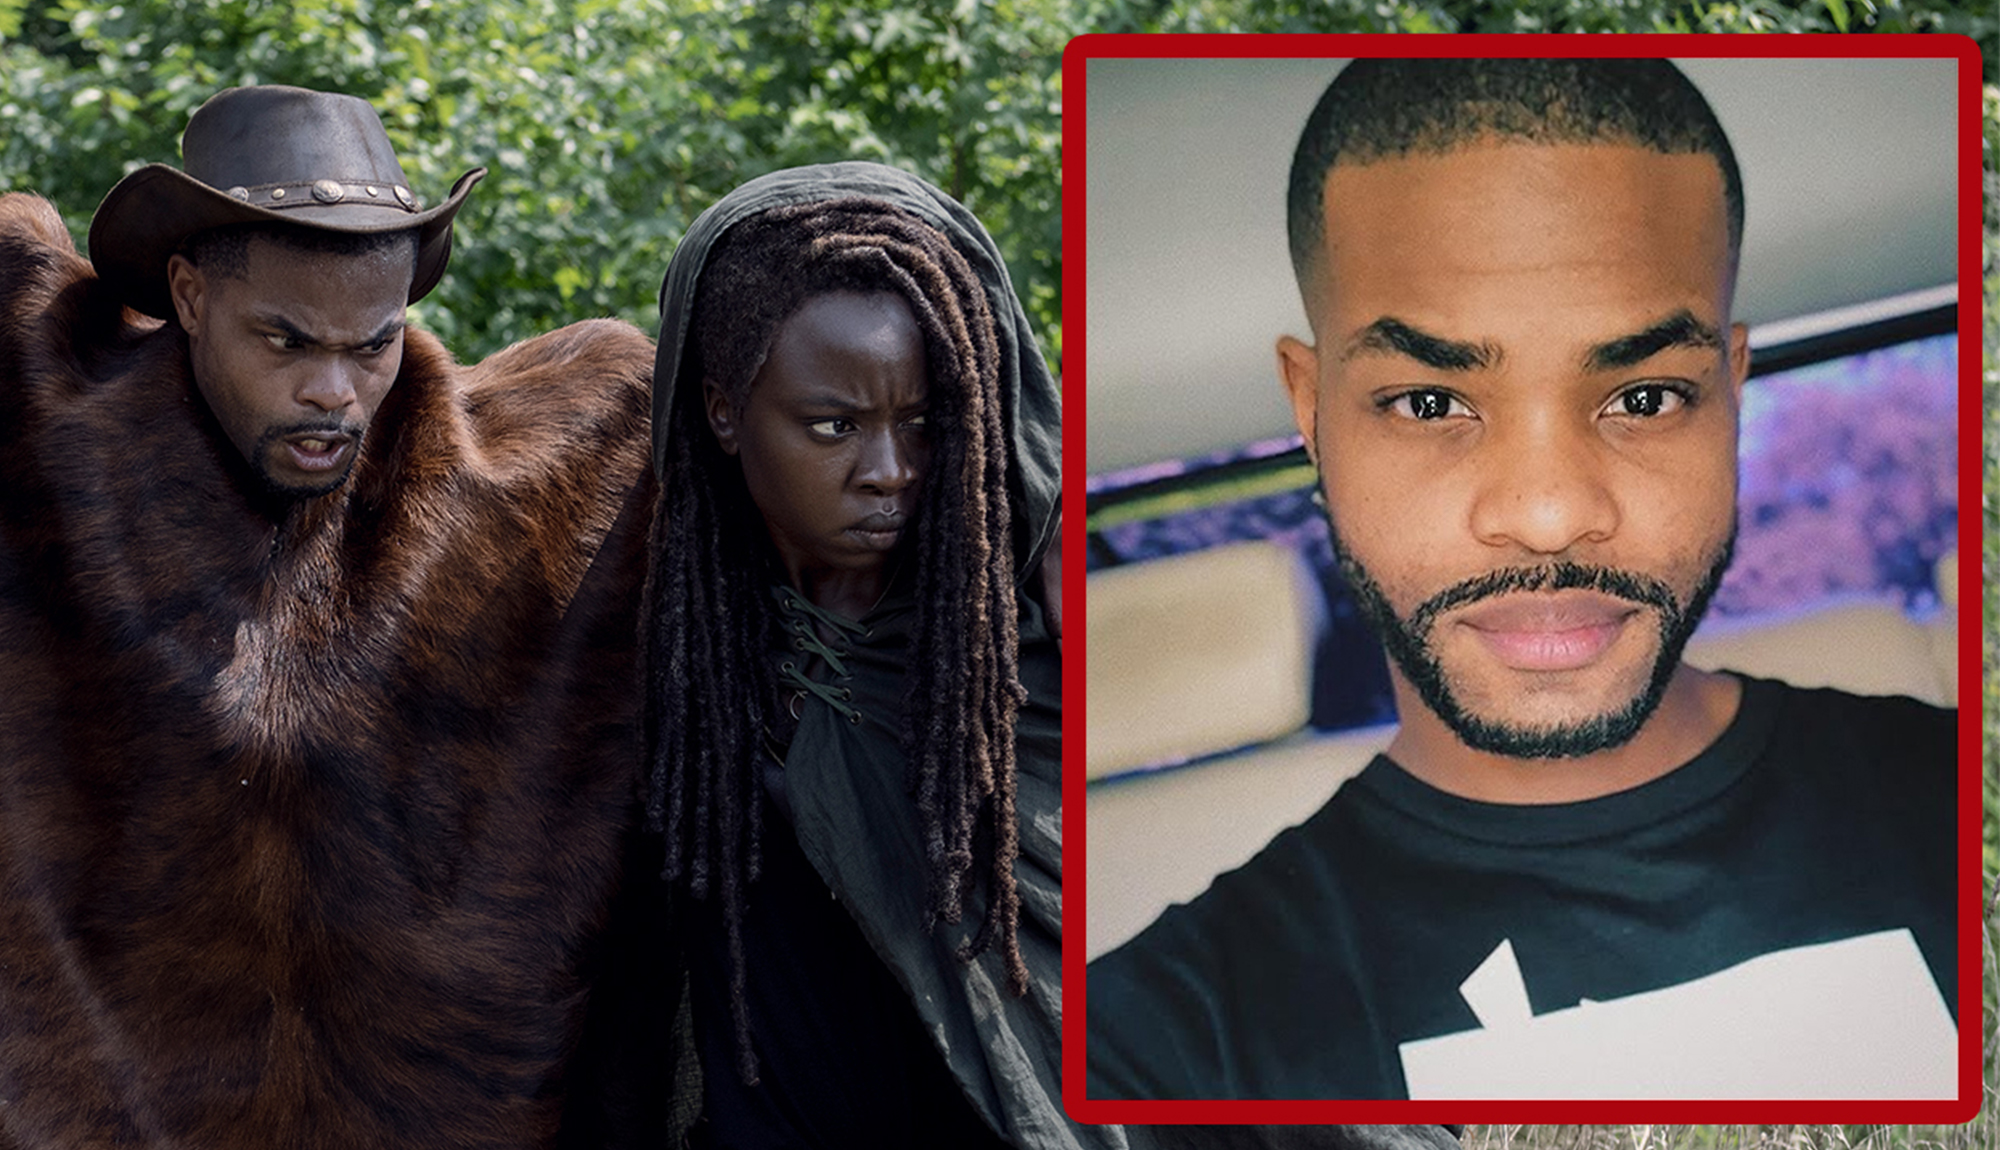 Will We See King Bach Again in The Walking Dead?